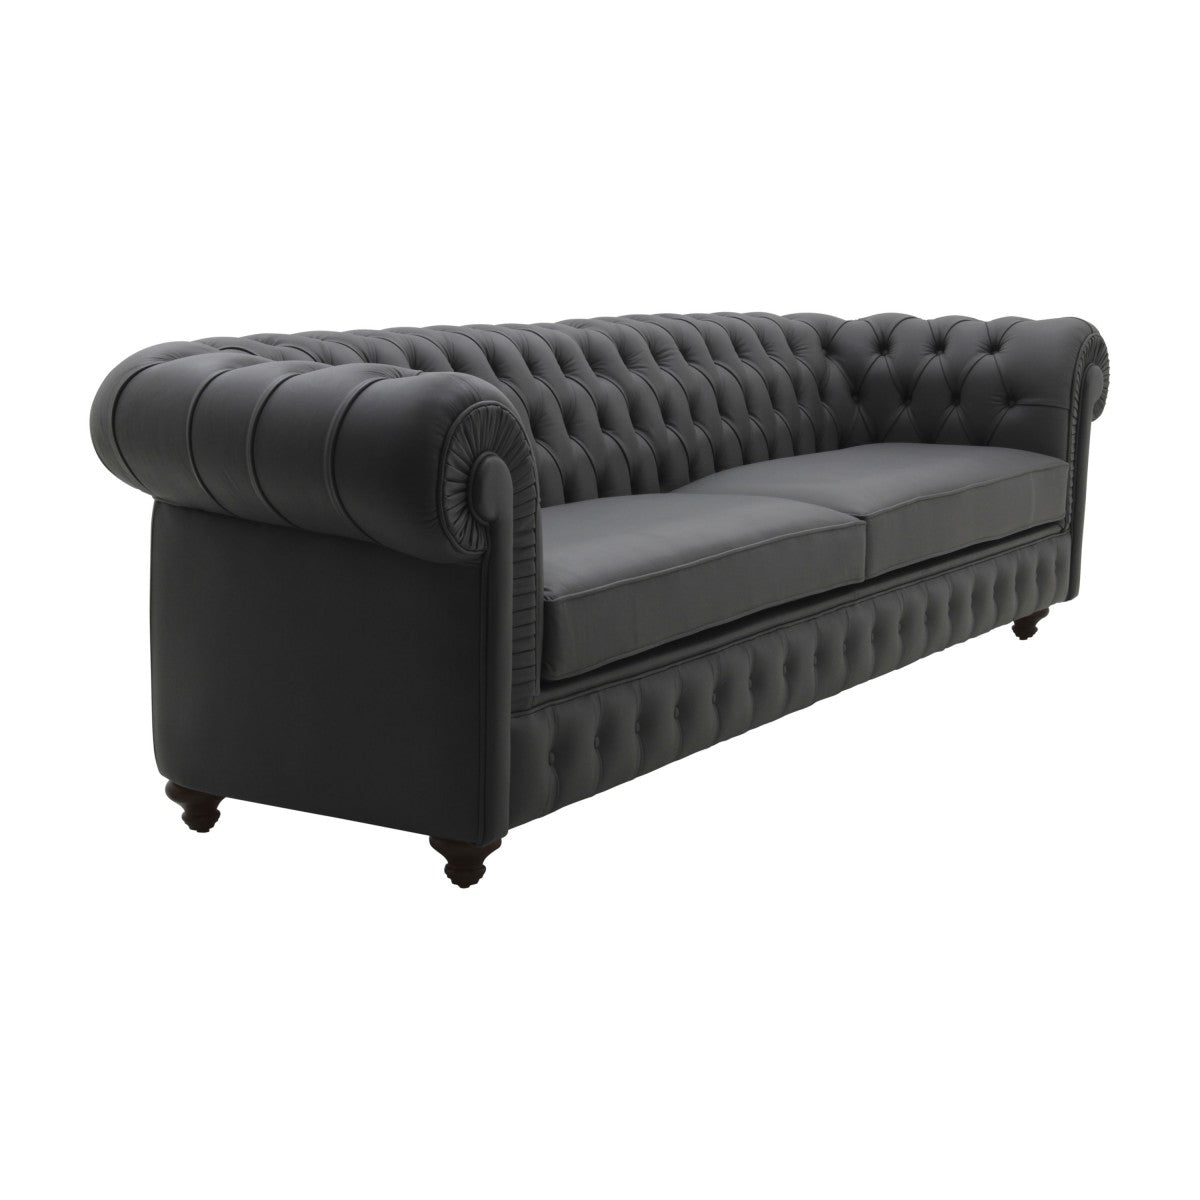 Tervere Bespoke Upholstered Chesterfield Style Five Seater Sofa MS9503G Custom Made To Order